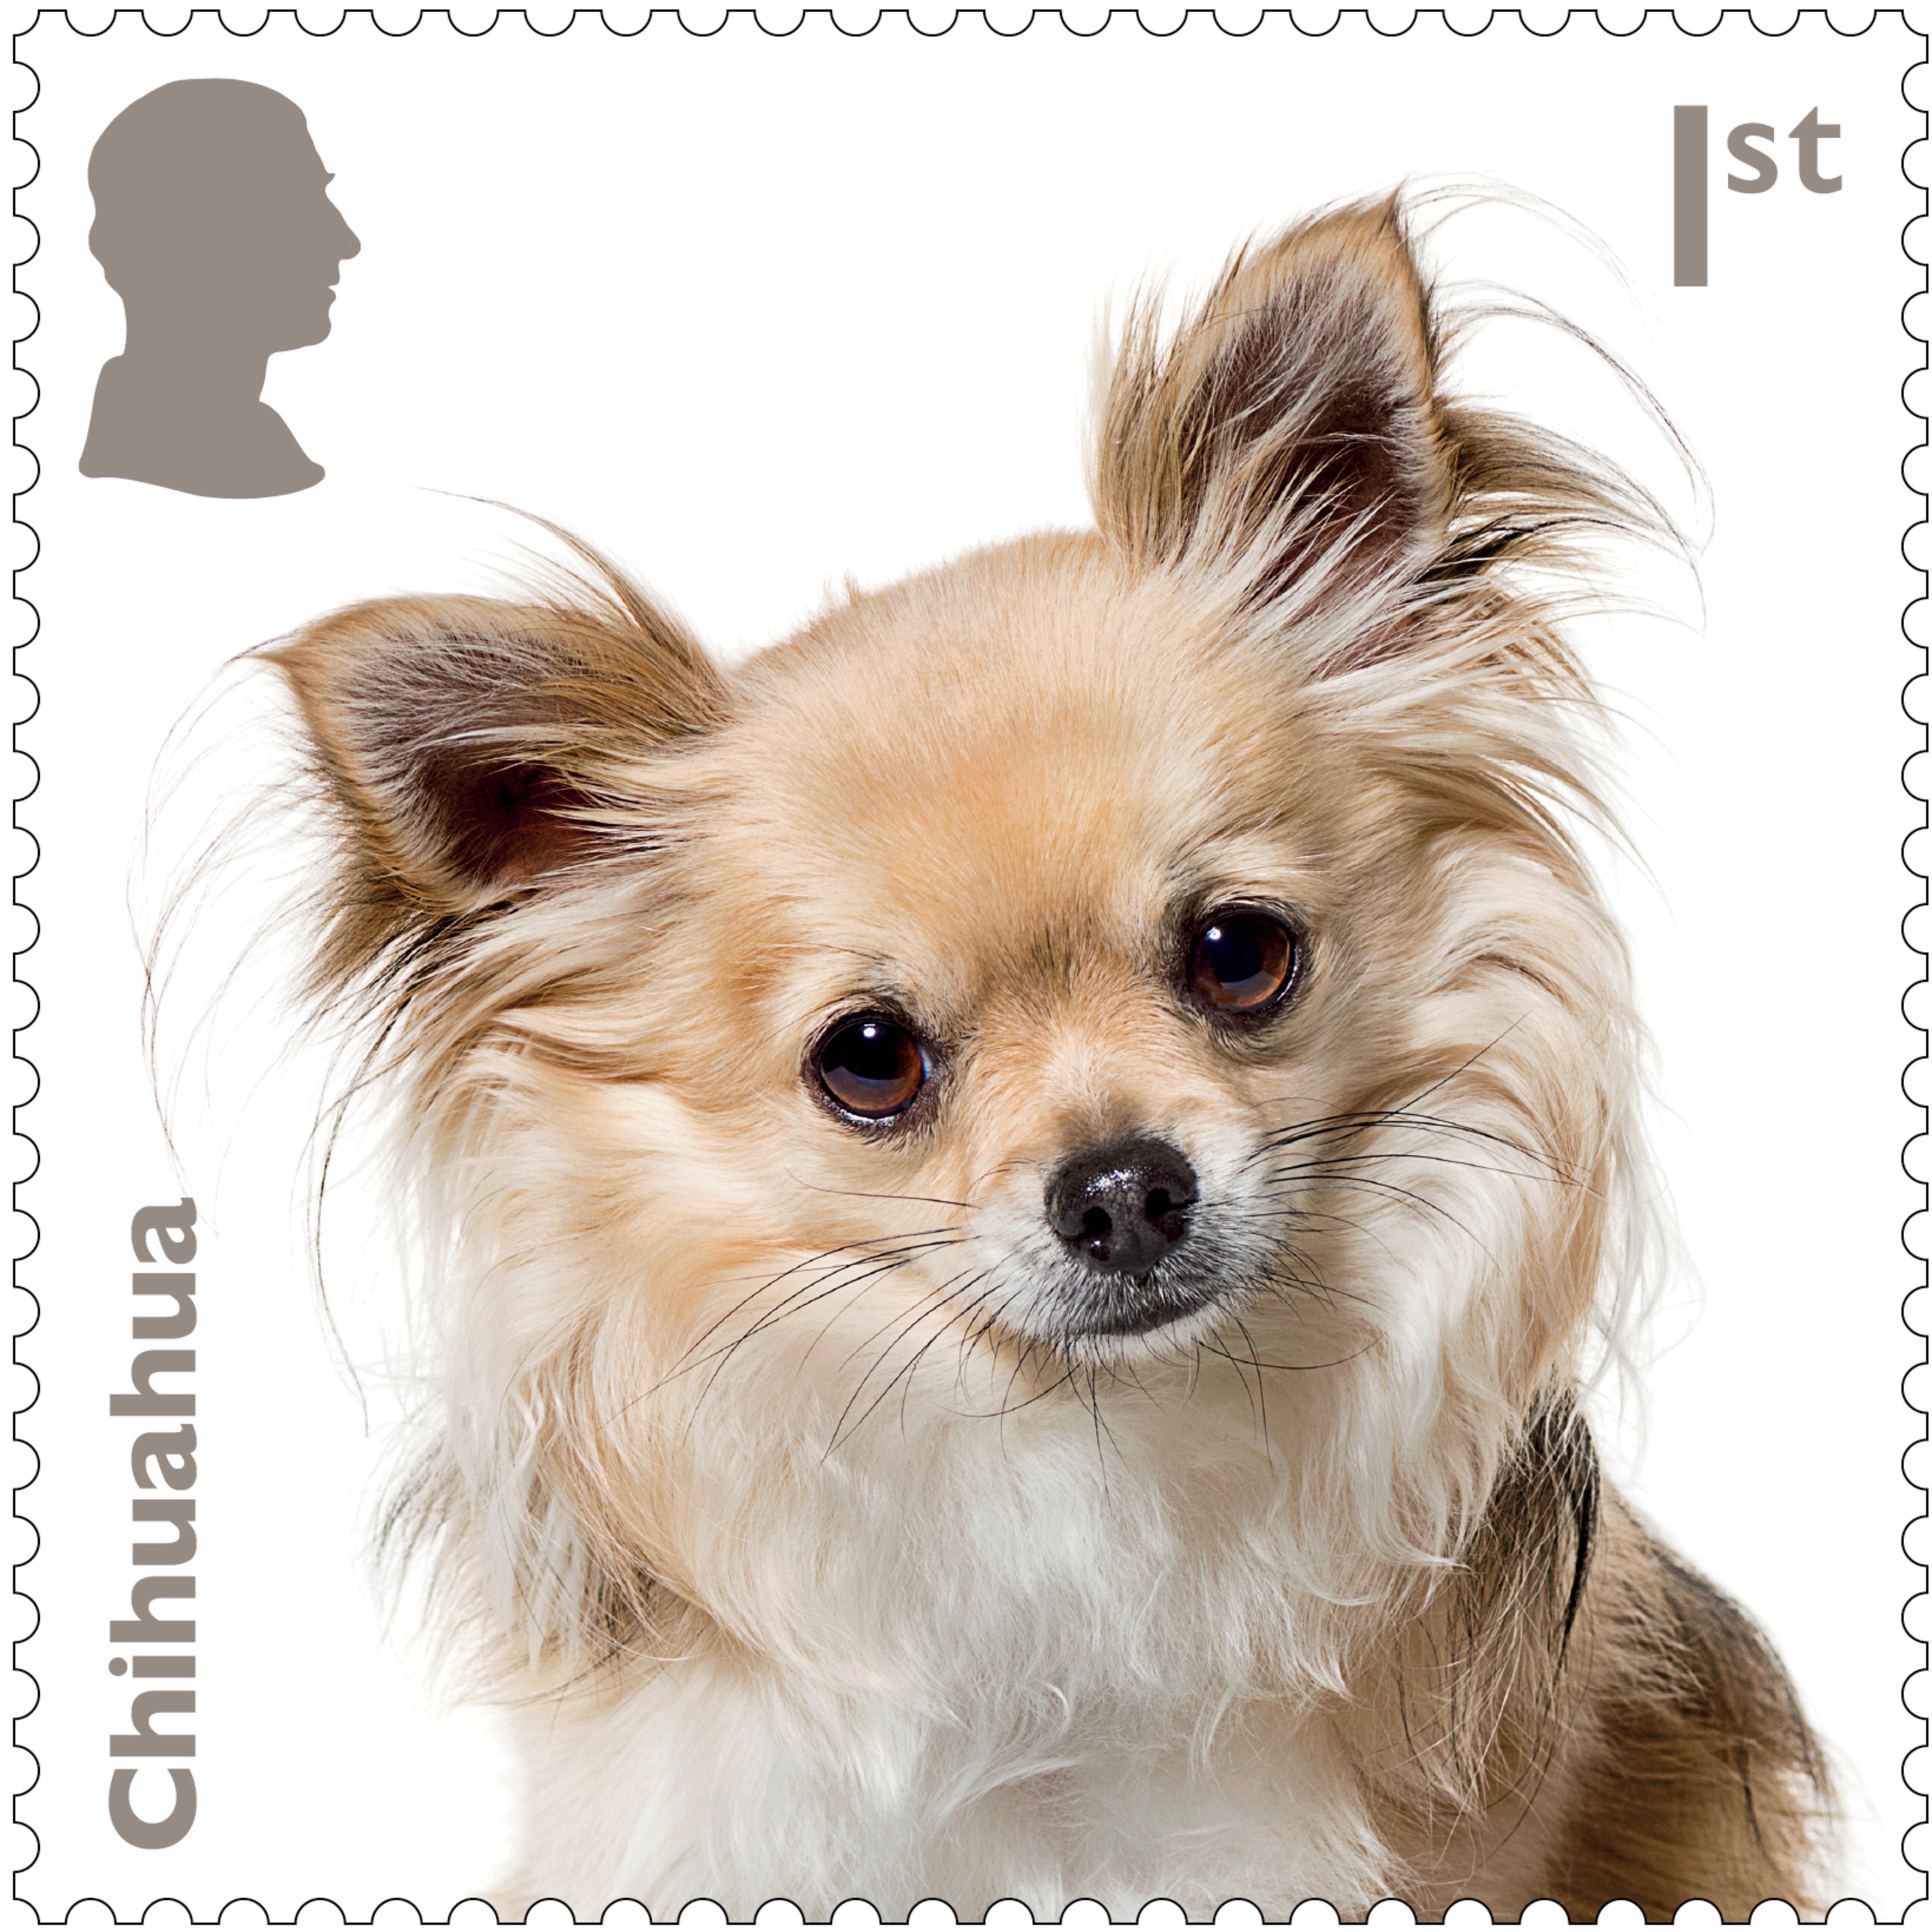 The Chihuahua stamp